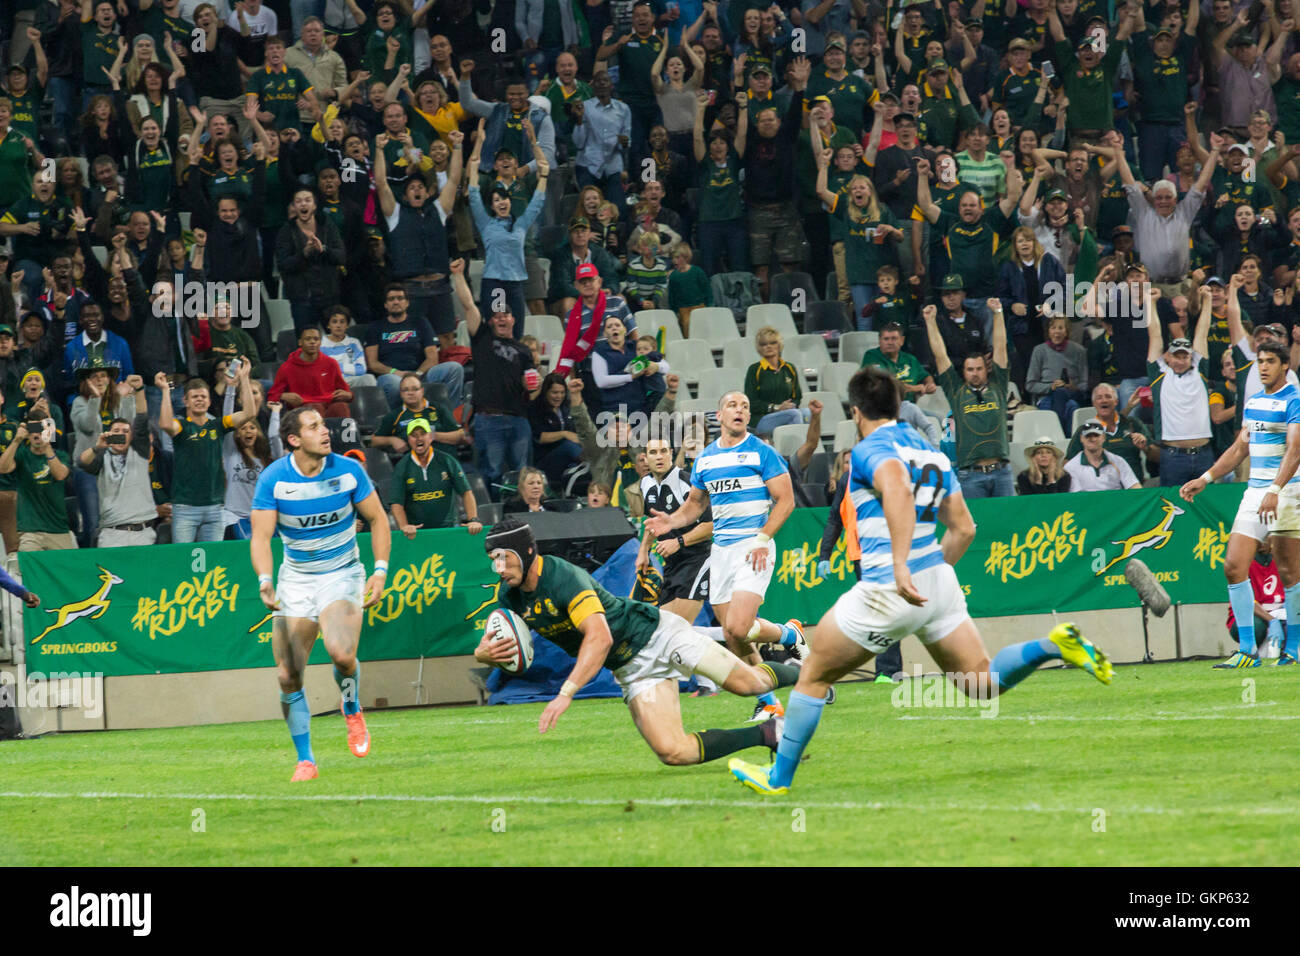 Nelspruit, South Africa. 20 August 2016. The South African National Rugby team in action against the Pumas at Mbombela Stadium. Johan Goosen diving over to score a try. Stock Photo